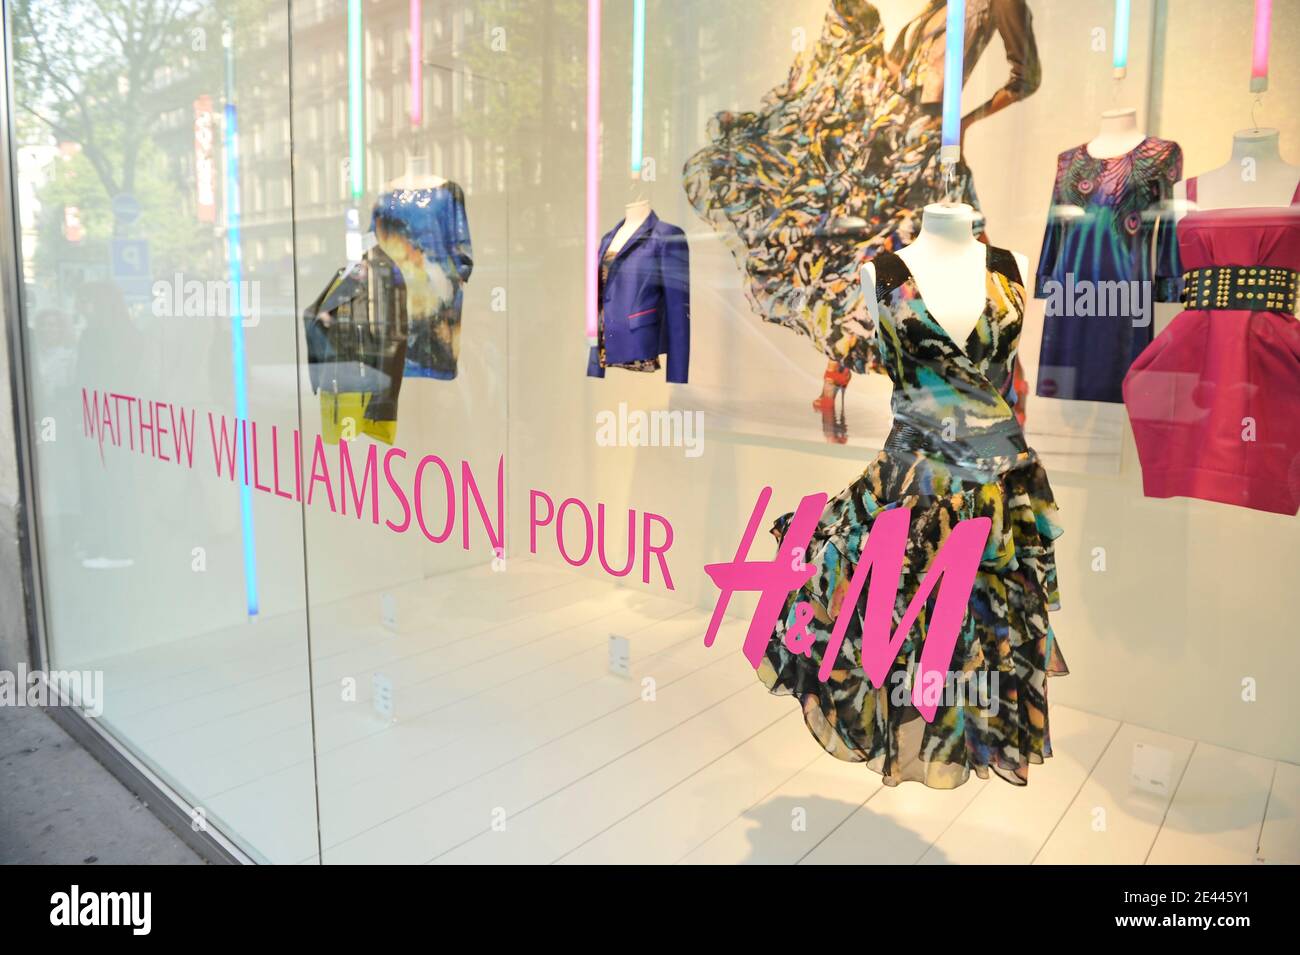 Atmosphere during the Matthew Williamson for H&M collection launch, held at  the H&M store on 54 Boulevard Haussmann in Paris, France, on April 23,  2009. Photo by Edouard Bernaux/ABACAPRESS.COM Stock Photo - Alamy